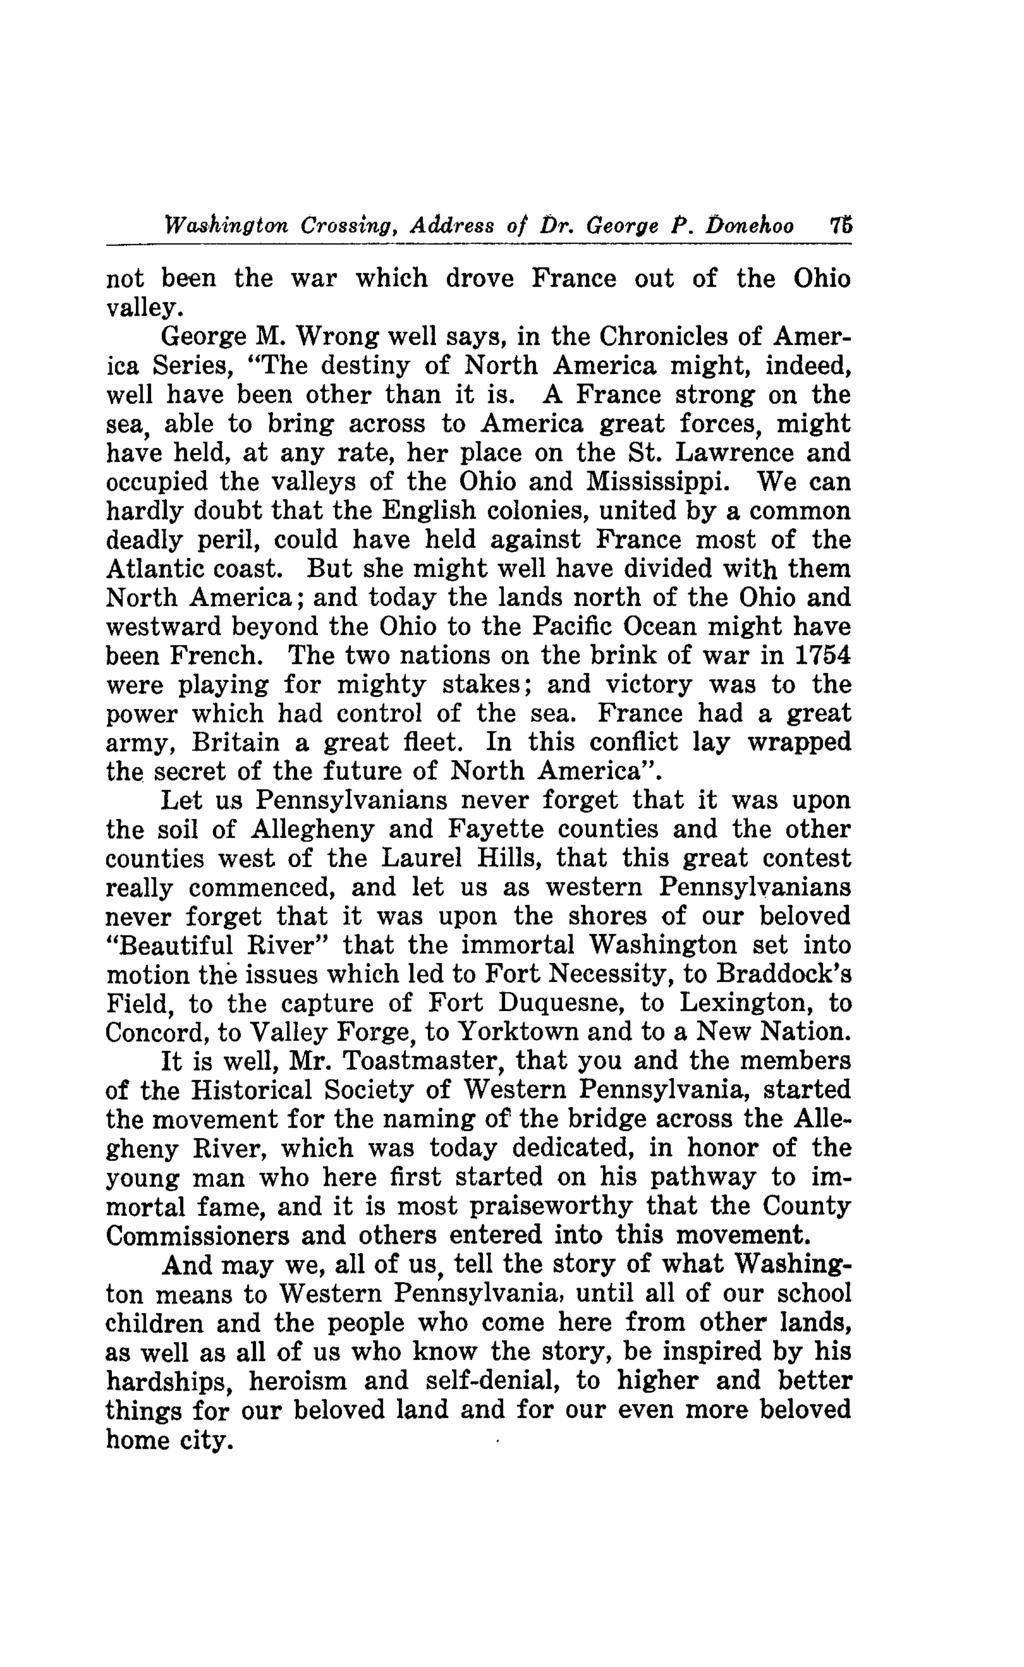 Washington Crossing, Address of Dr. George P. Donehoo 78 not been the war which drove France out of the Ohio valley. George M.